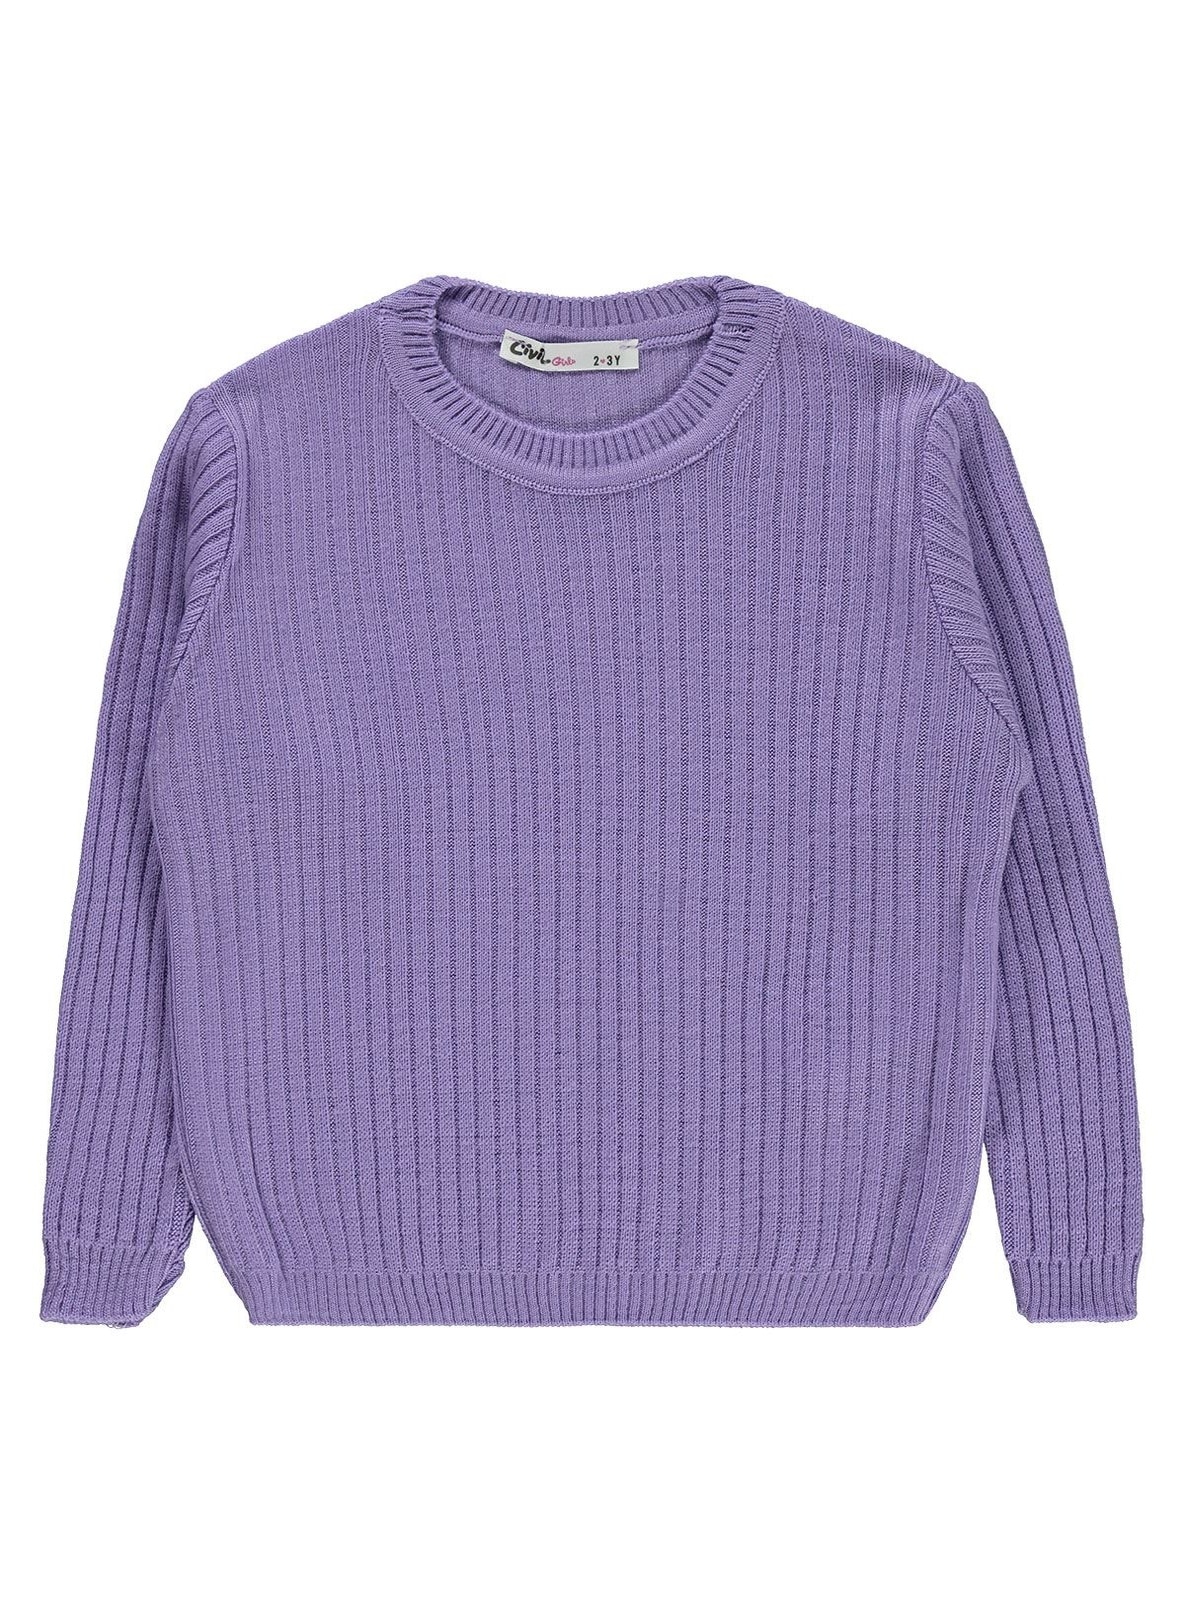 Lilac - Girls` Pullovers